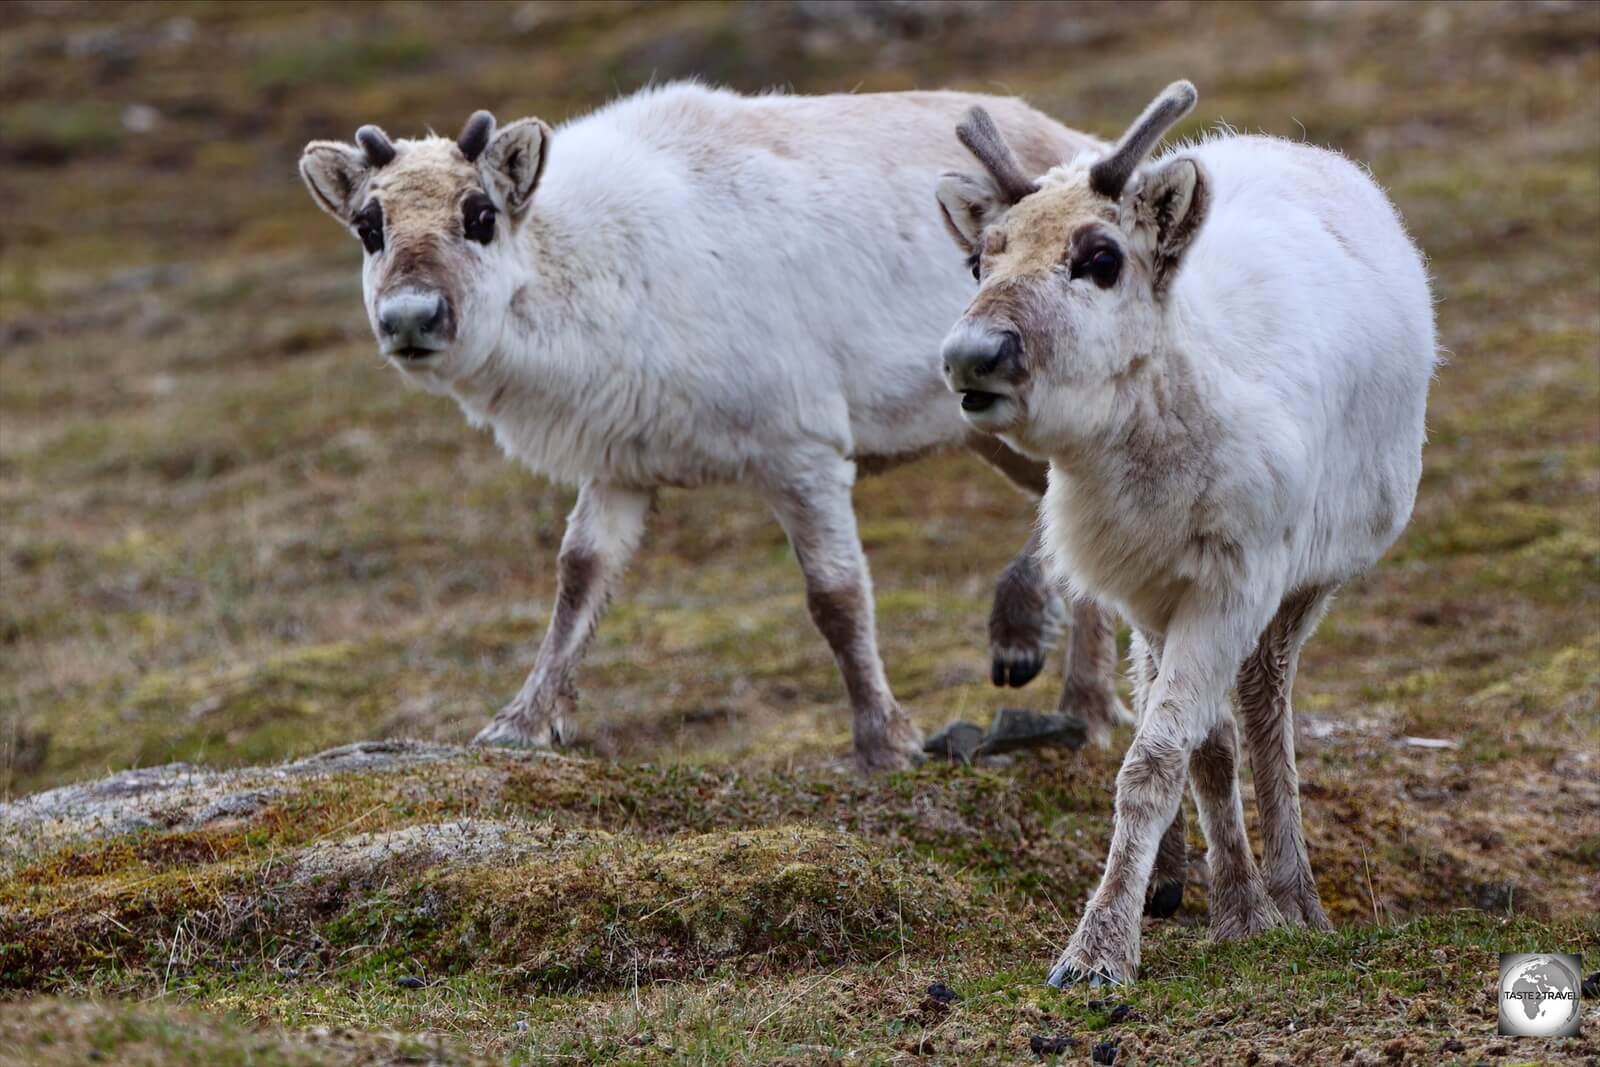 Shorter and stockier than other reindeer species, the Svalbard reindeer is endemic to the archipeligo.